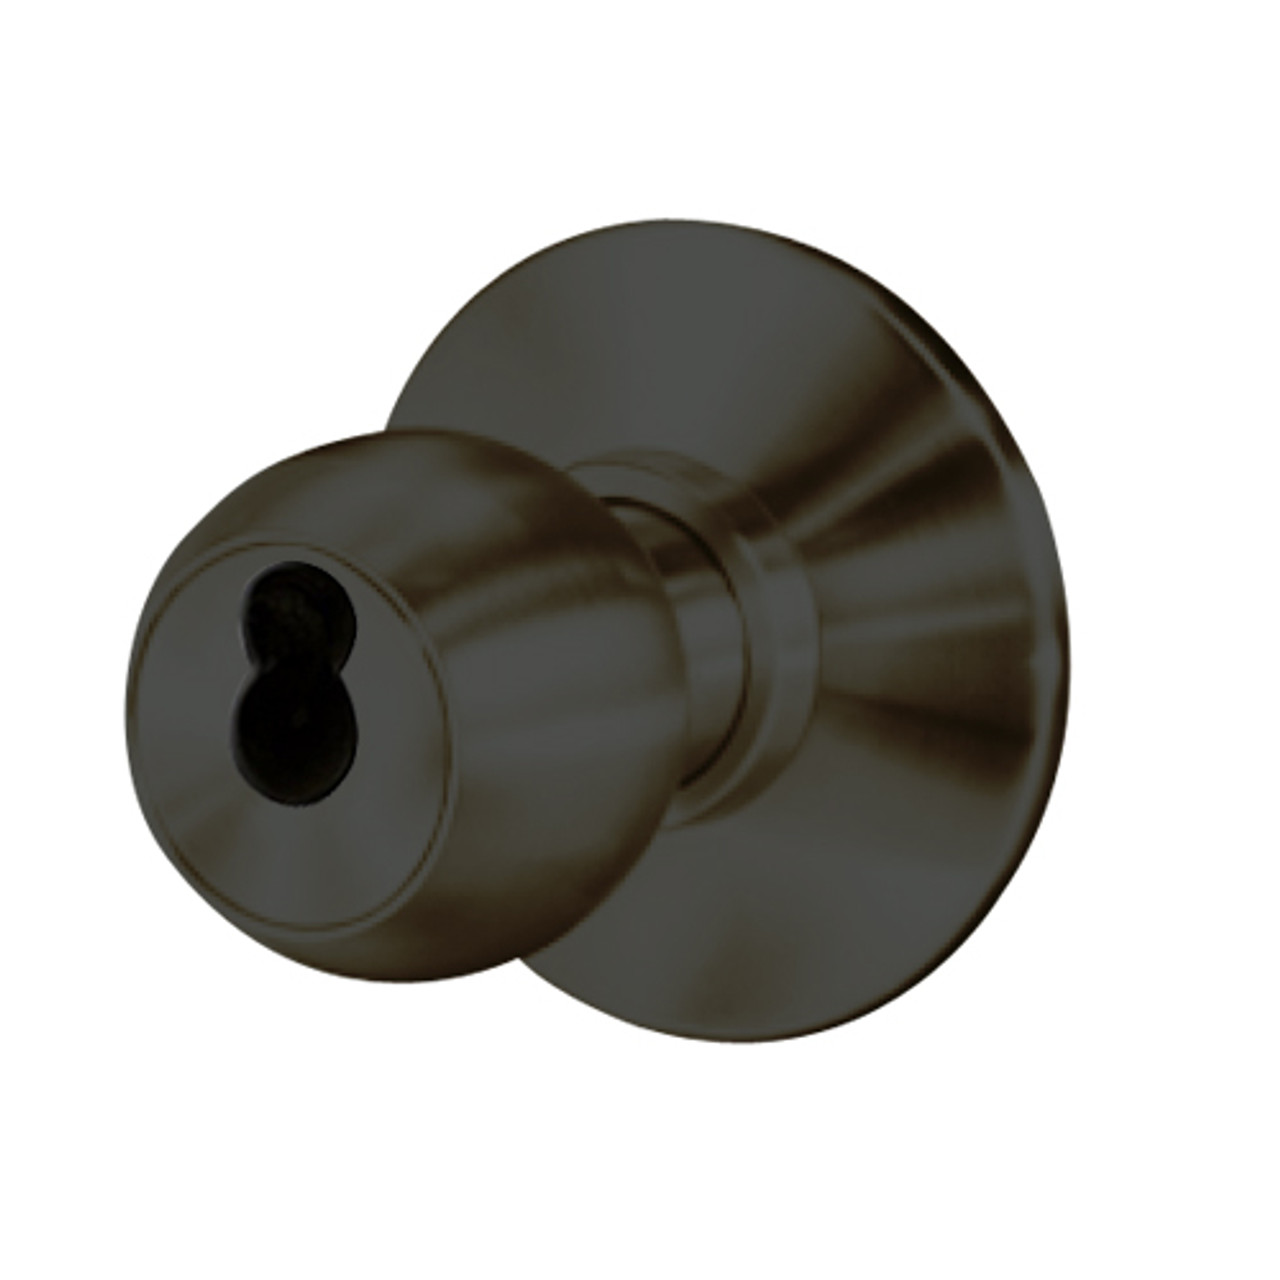 8K37YR4DS3613 Best 8K Series Exit Heavy Duty Cylindrical Knob Locks with Round Style in Oil Rubbed Bronze